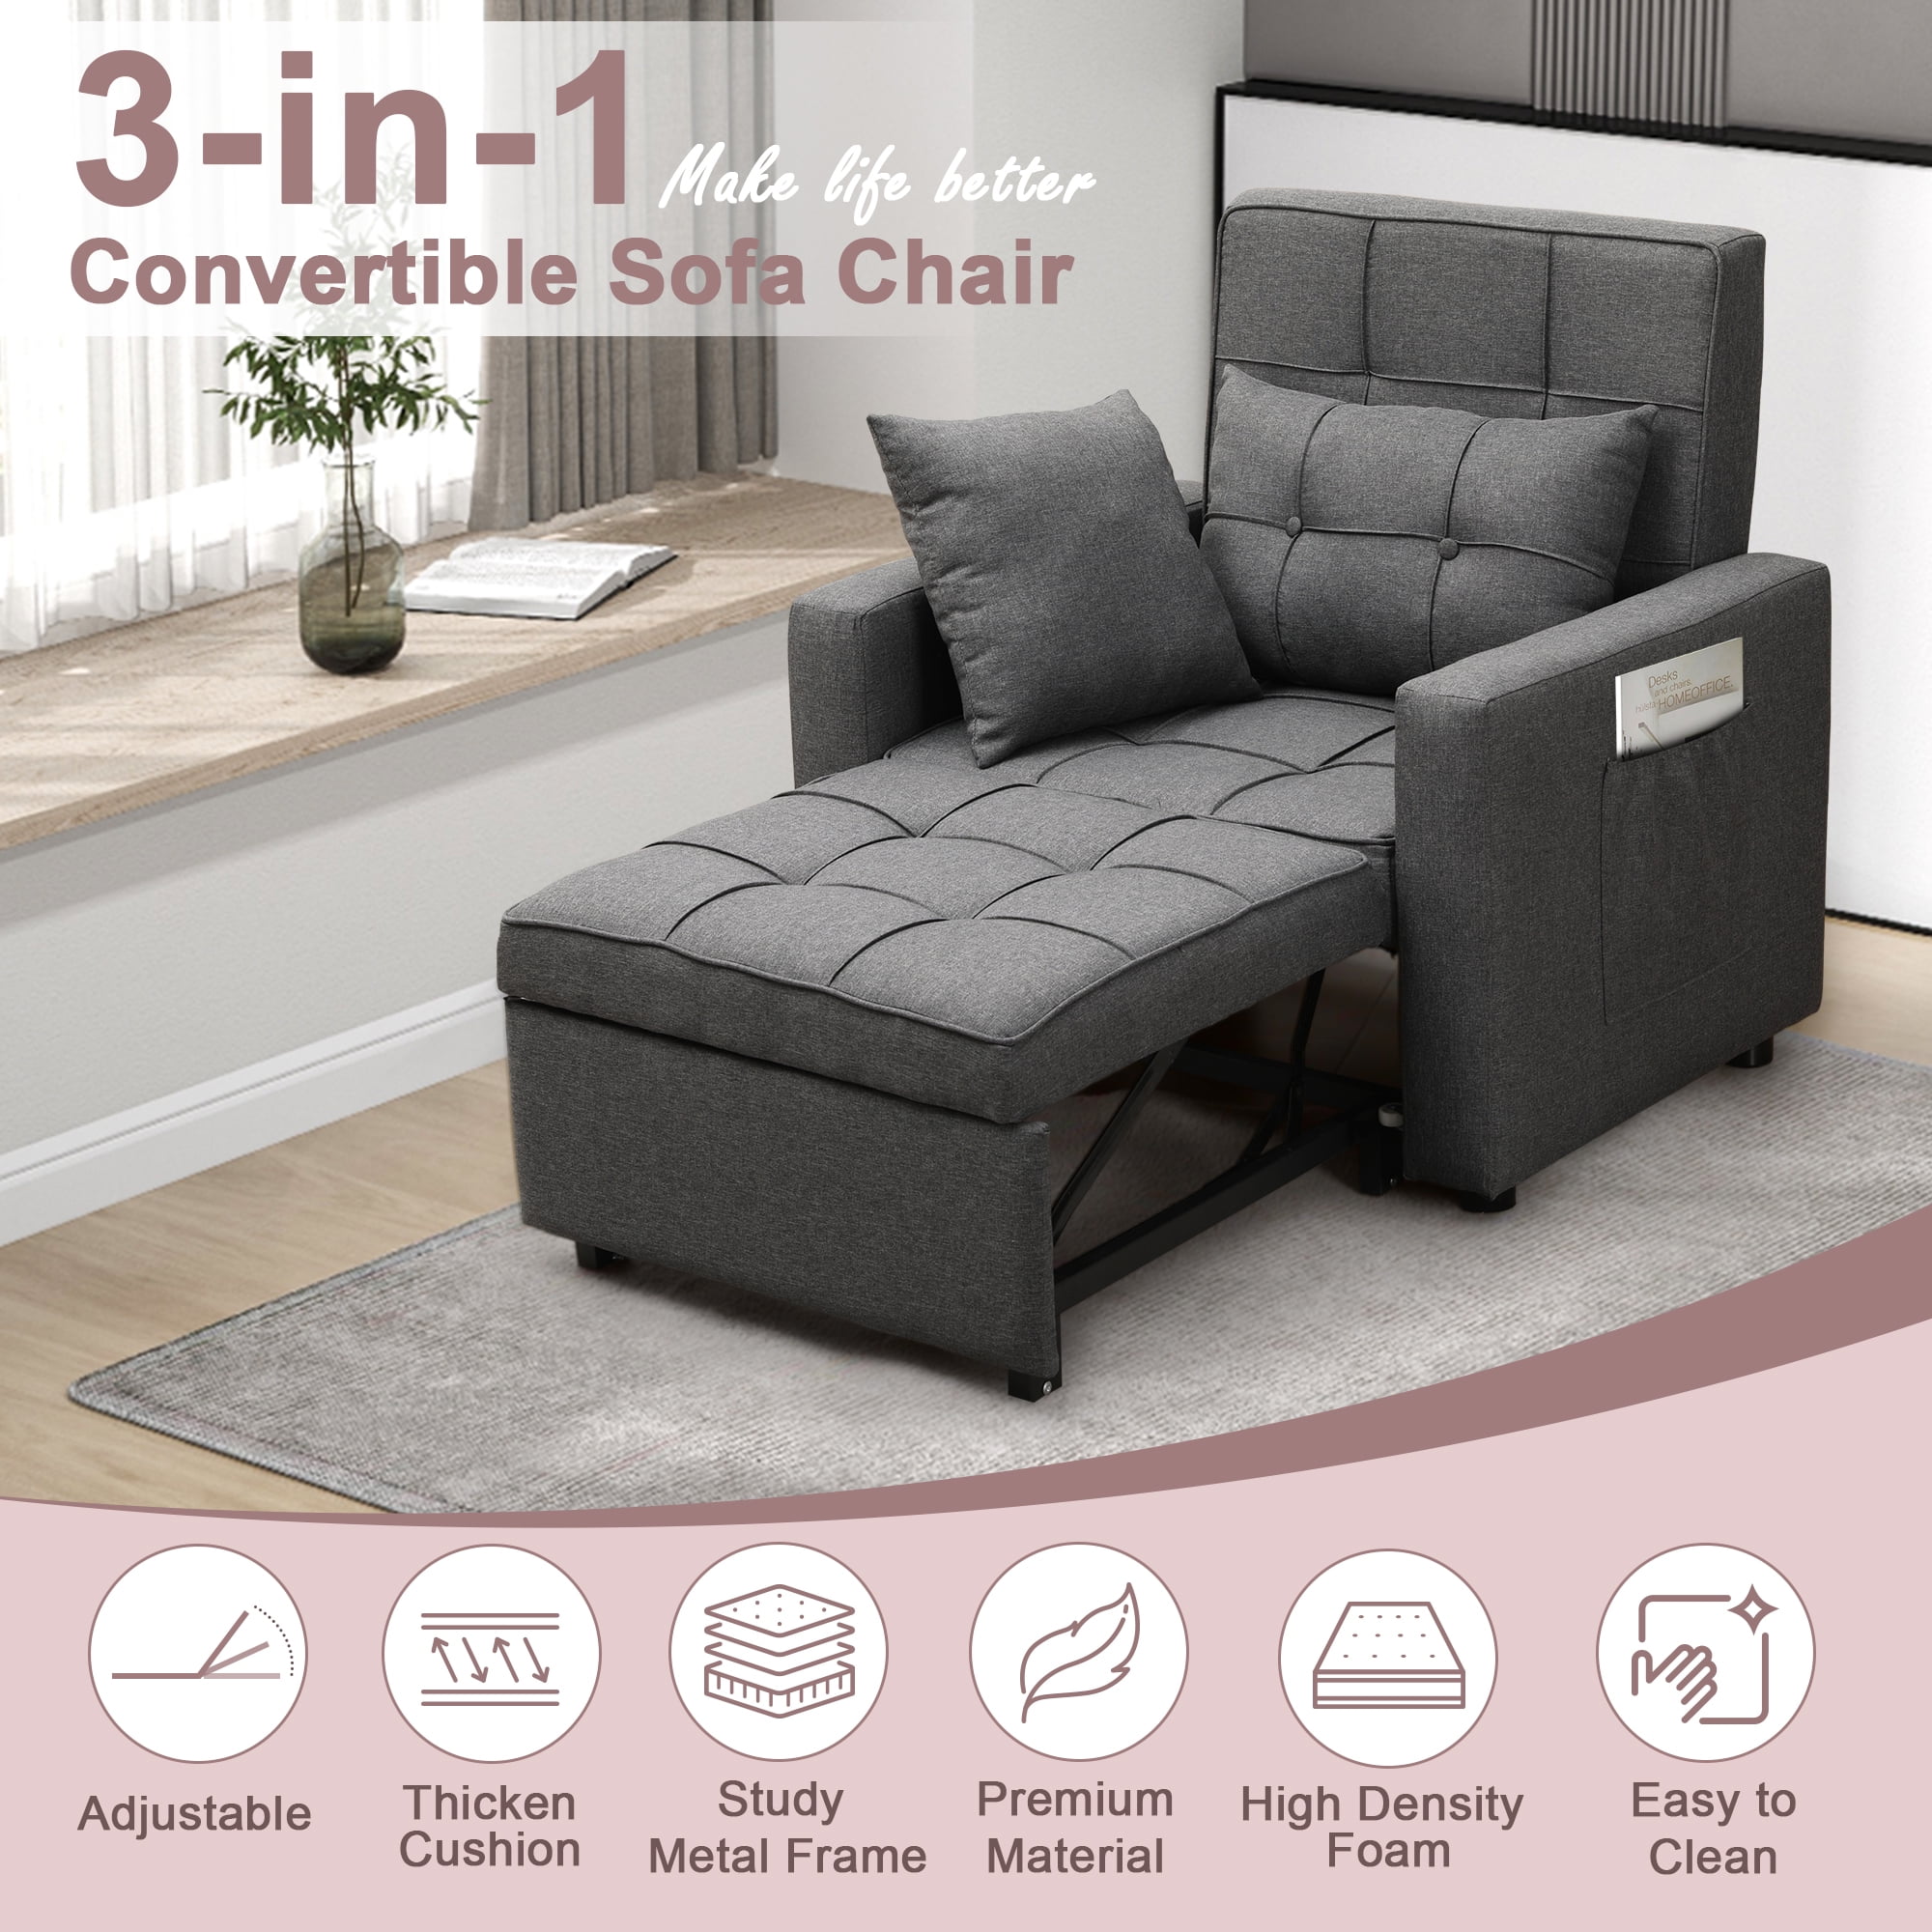 Tolead Convertible Folding Sleeper Sofa Chair Bed With Adjule Backrest Reading Bedroom Living Room Com